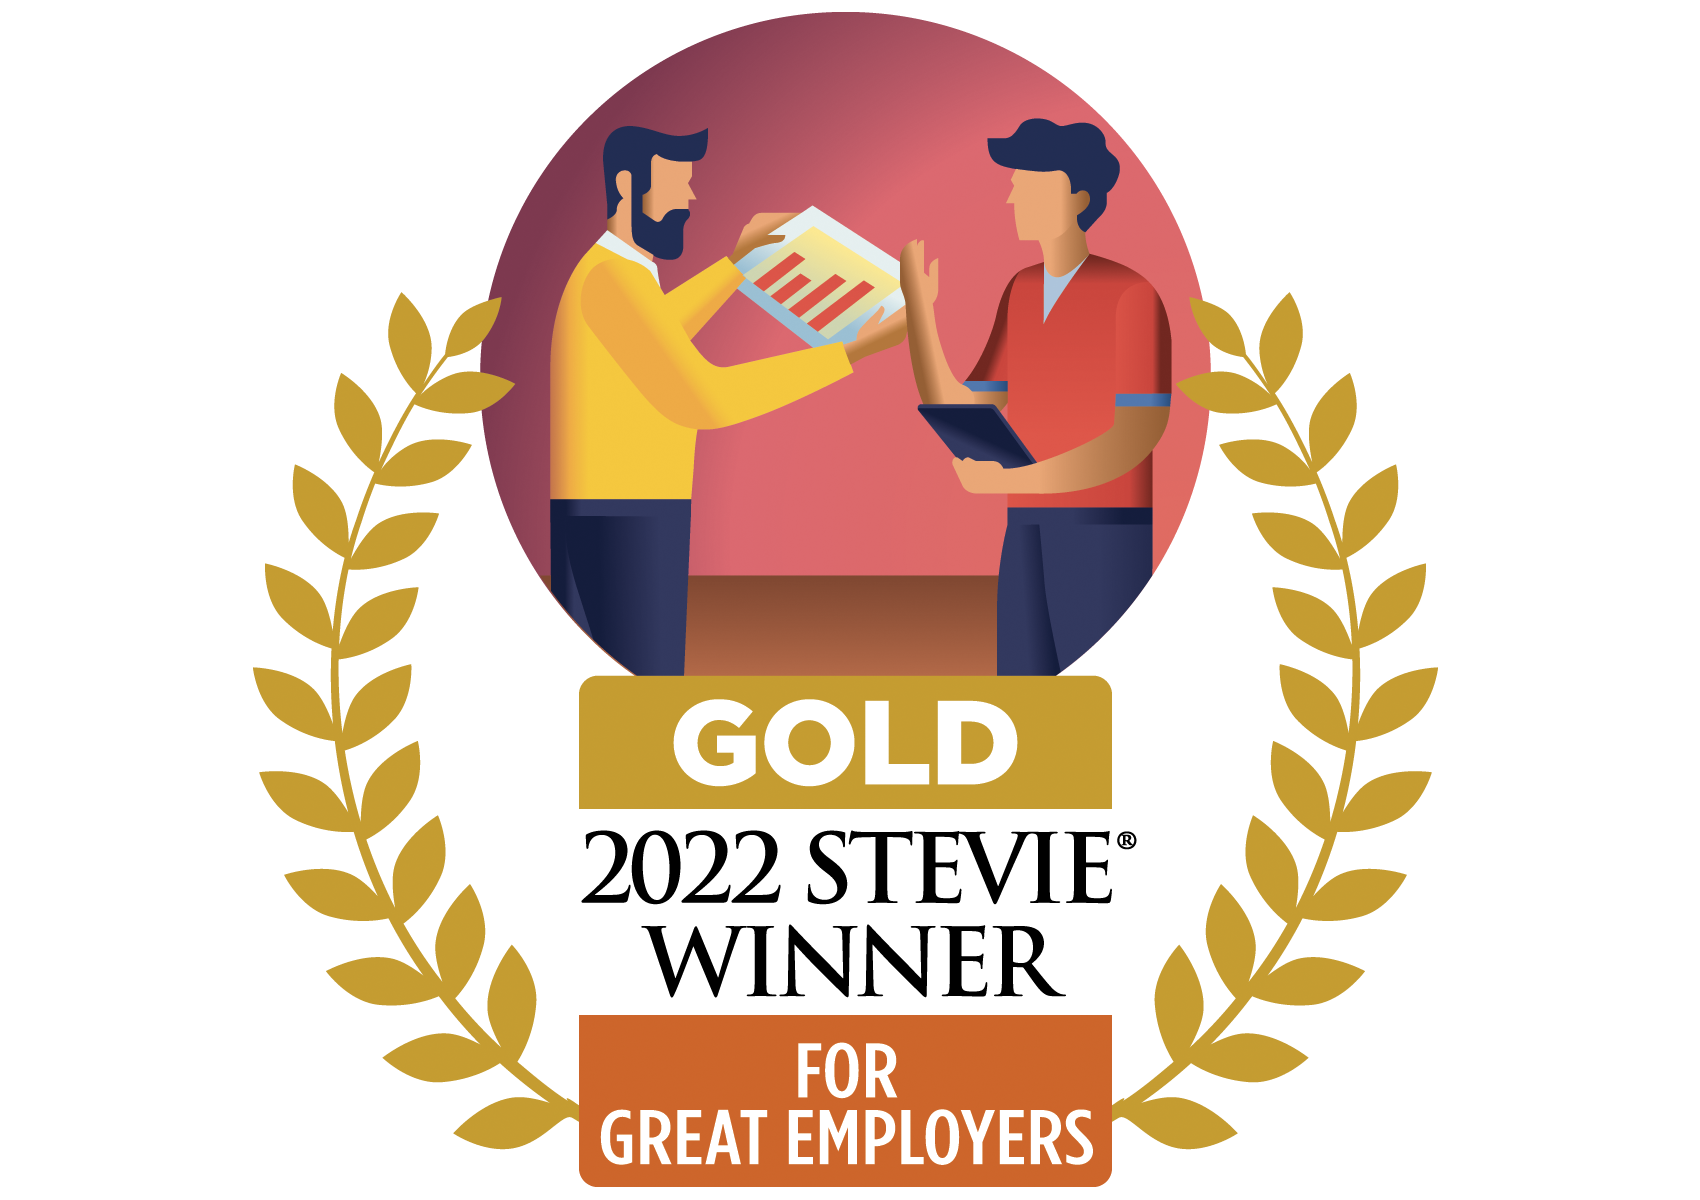 TimeXtender Wins Coveted Stevie® Gold Award for“Employee Relations Team of the Year”